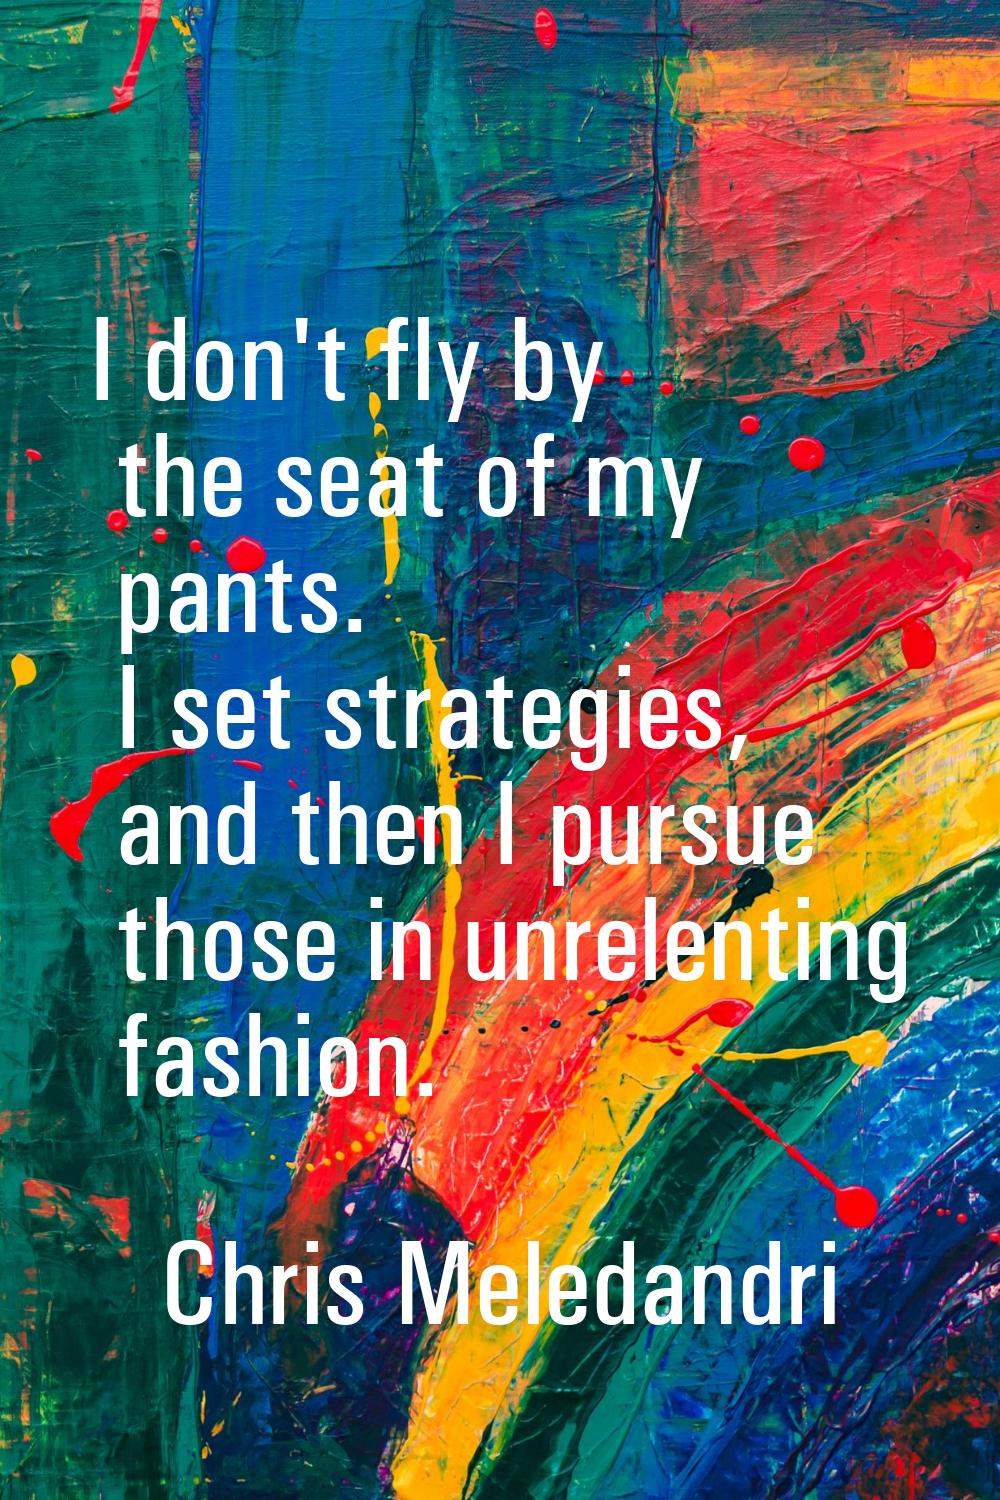 I don't fly by the seat of my pants. I set strategies, and then I pursue those in unrelenting fashi